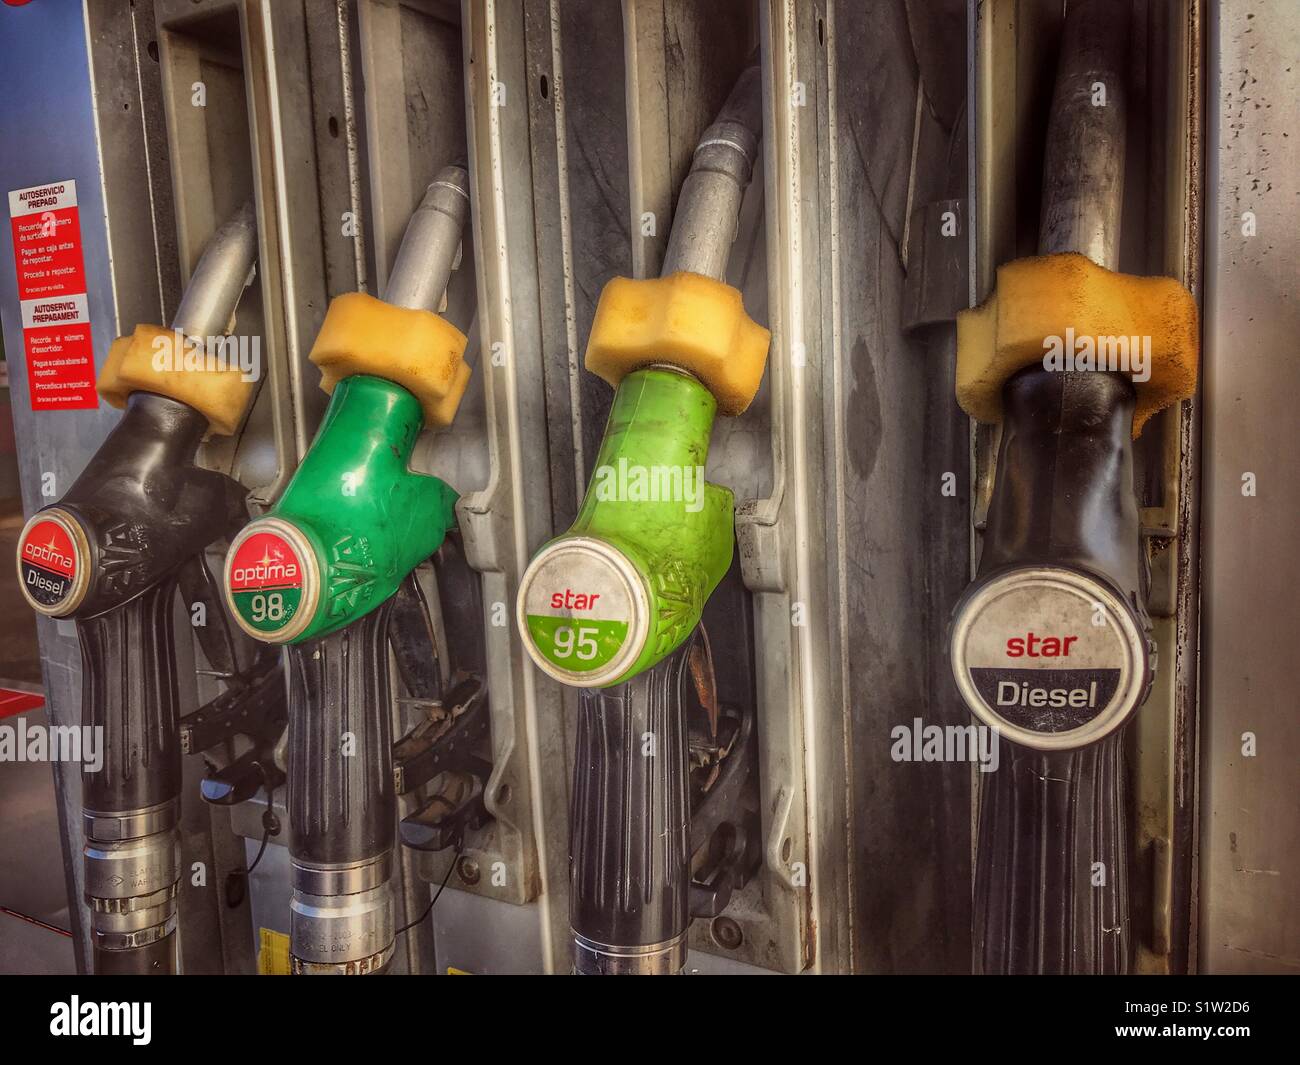 Fuel pumps at a filling station Stock Photo